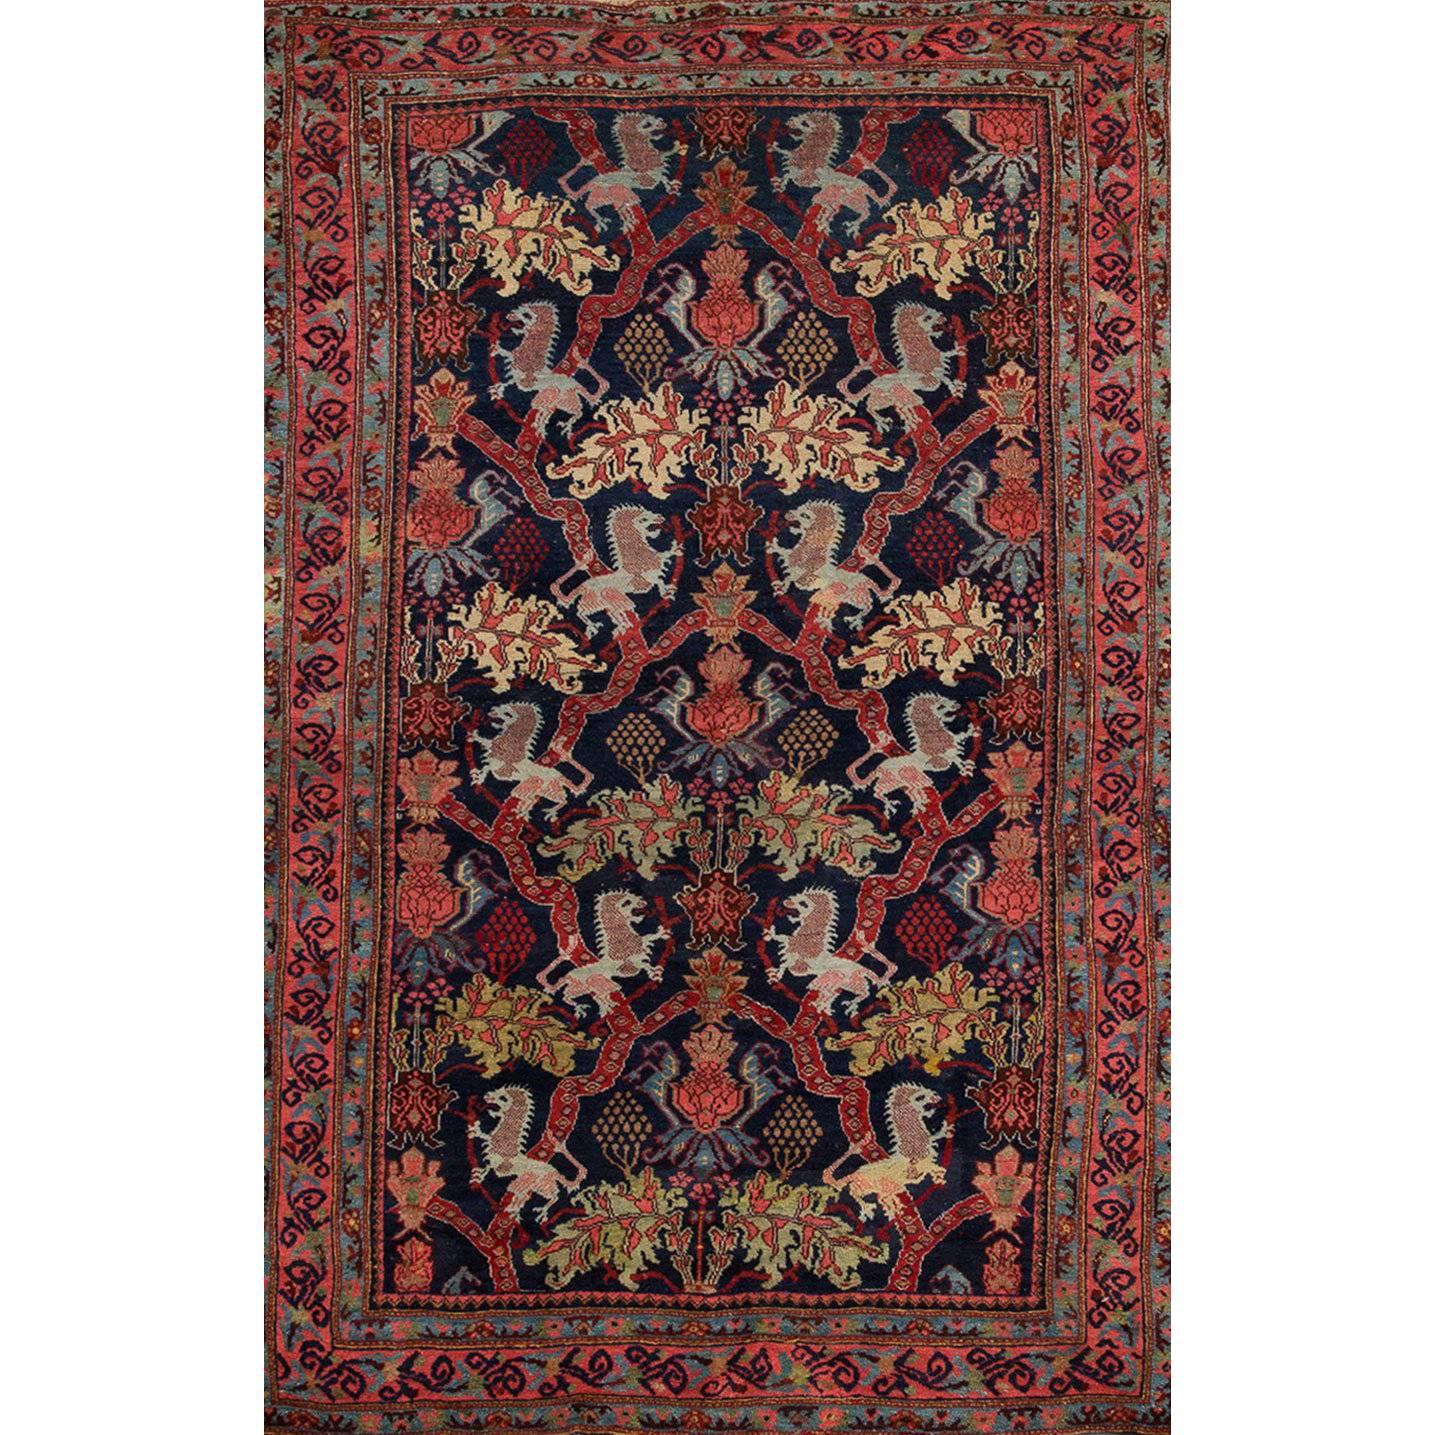 Antique Red and Blue All-Over Persian Bidjar Carpet, 4.05x6.10 For Sale